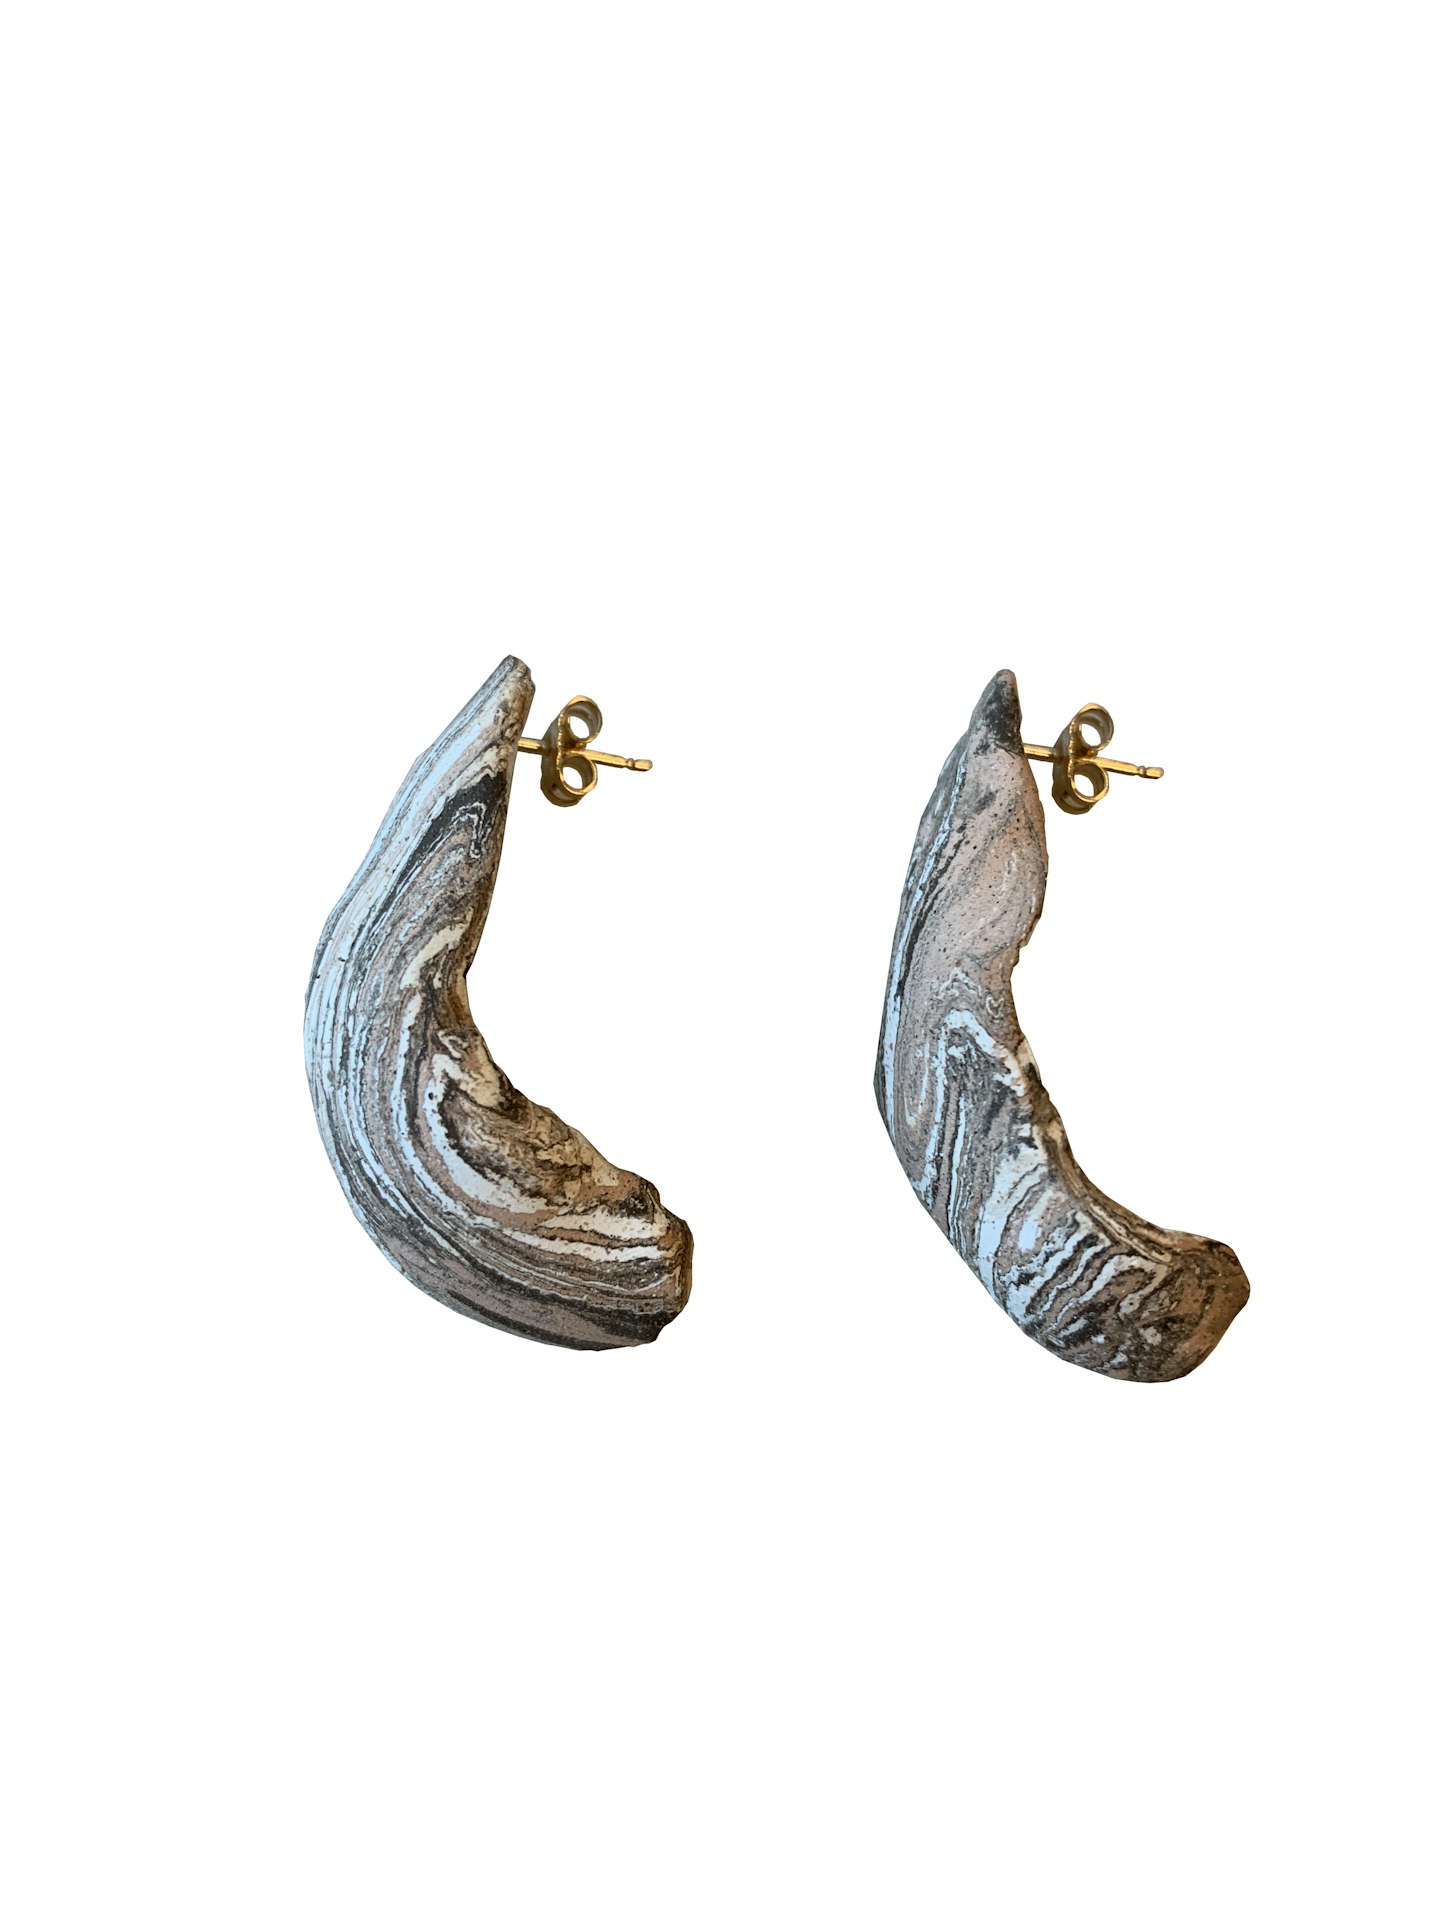 The Best of Modern Artisans - Eudon Choi Liv and Dom Earrings